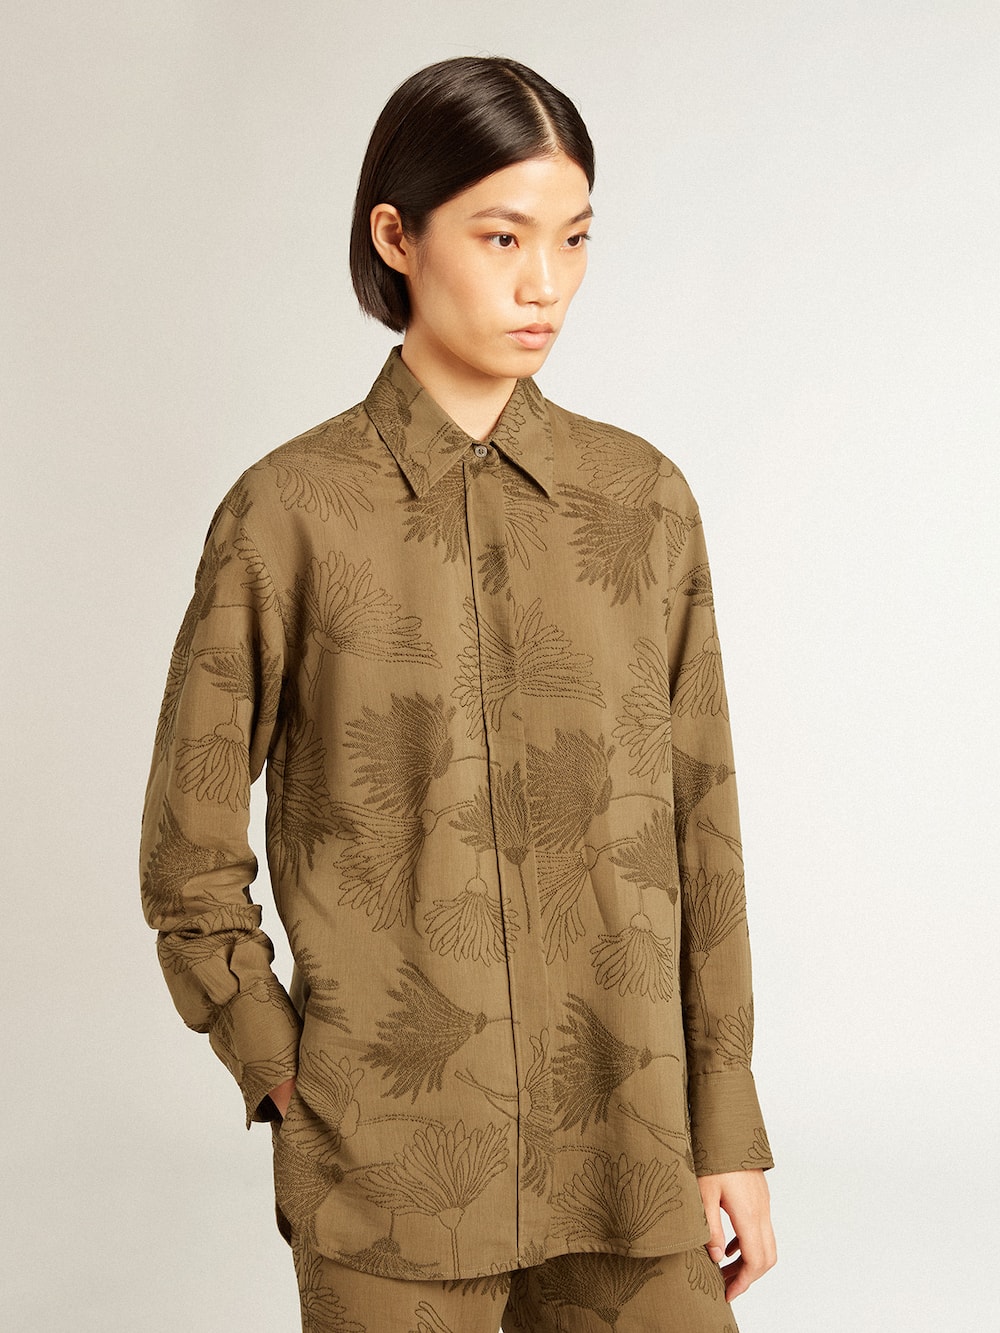 Golden Goose - Women's olive-colored viscose-cotton blend shirt with floral pattern in 